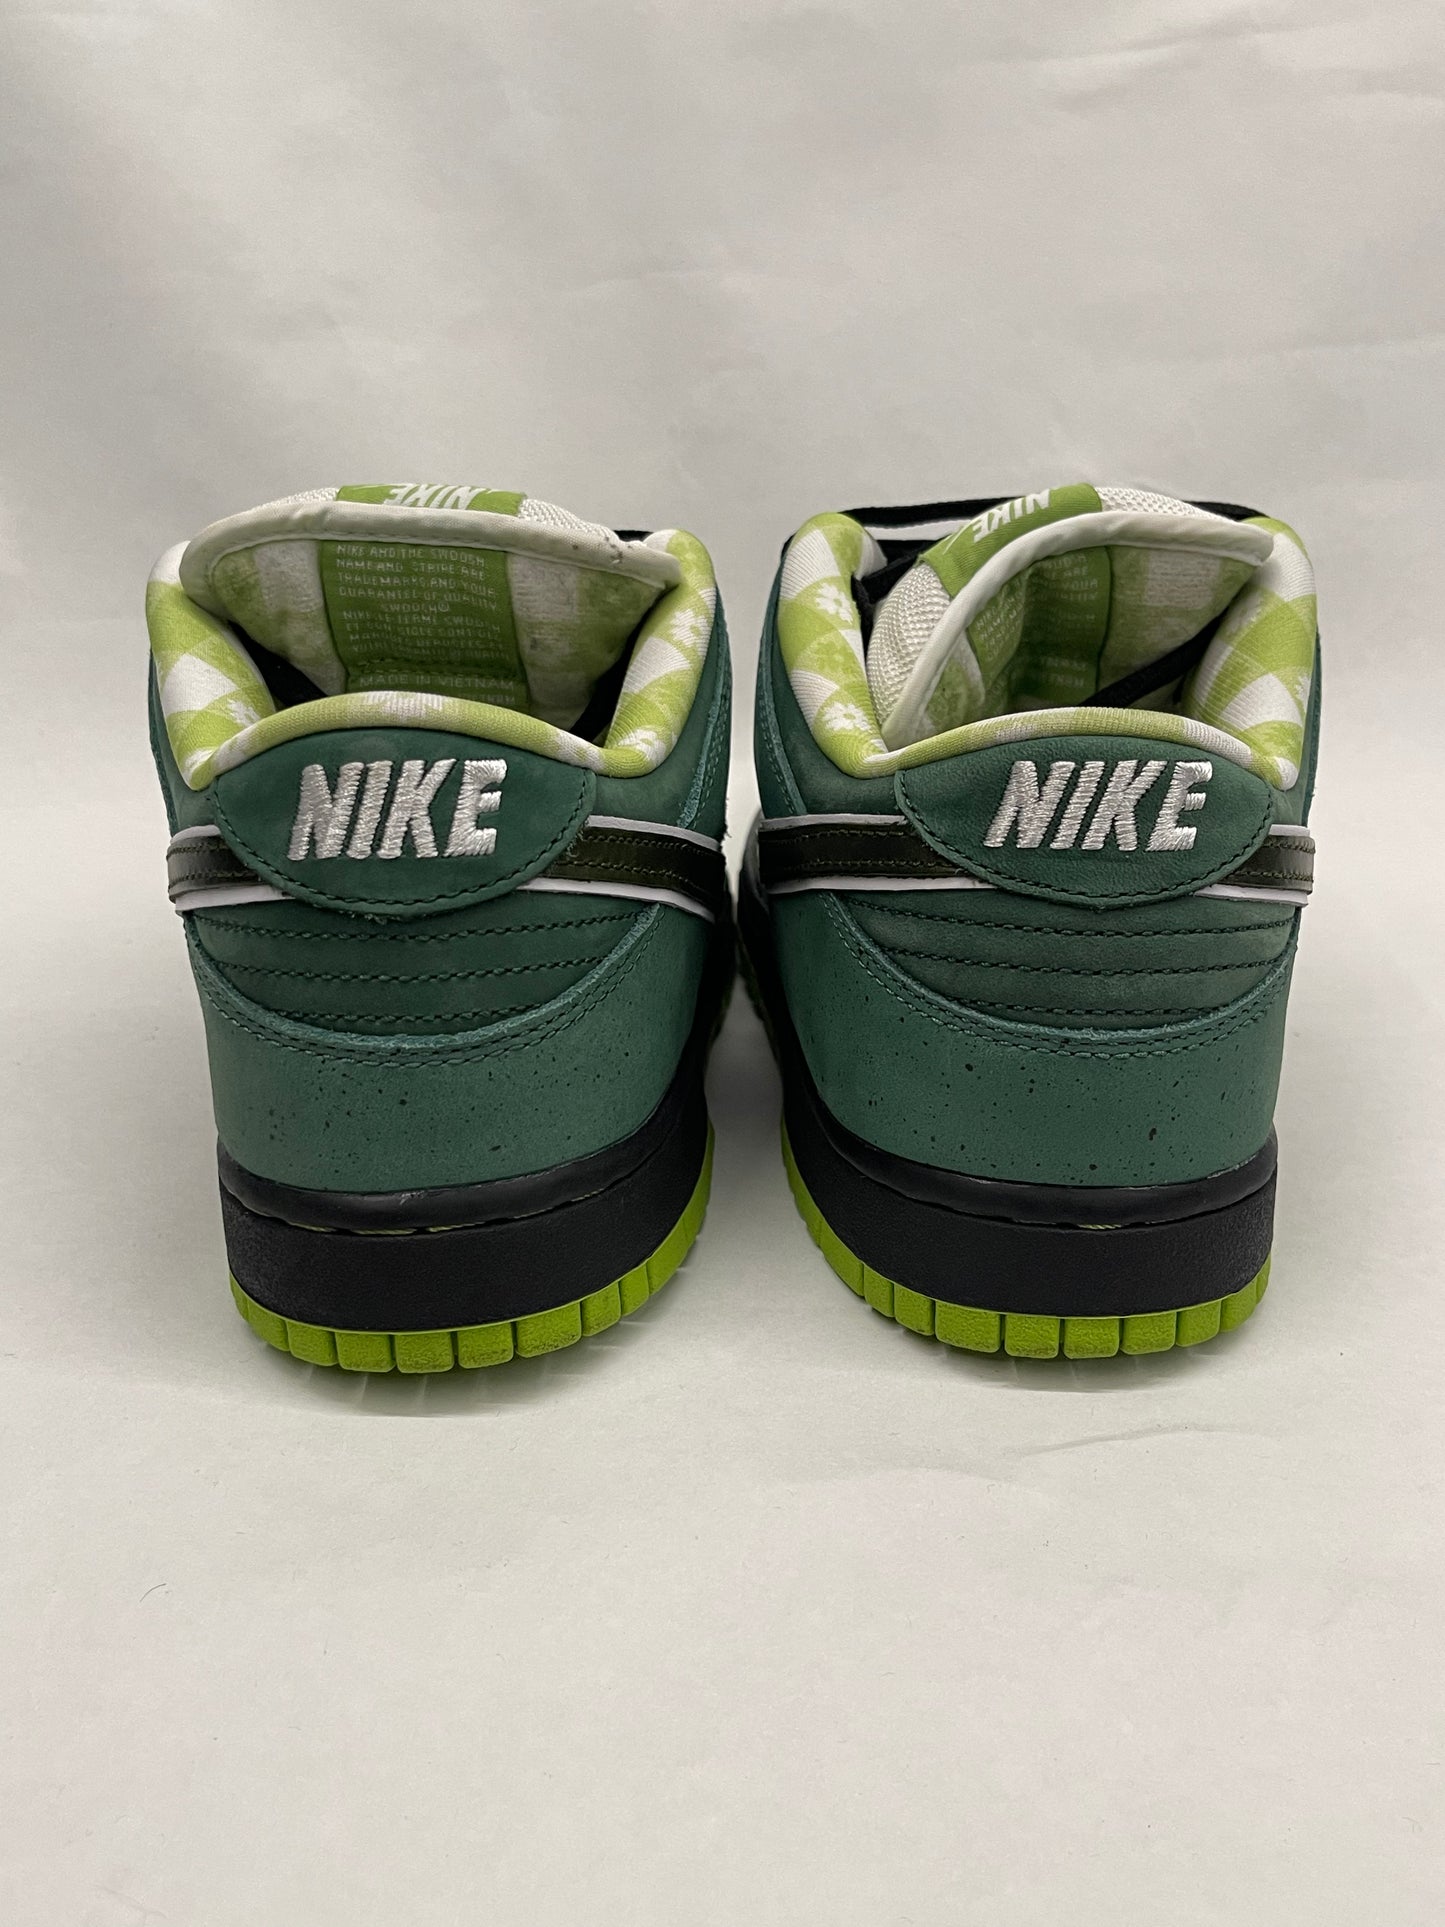 Dunk low SB Lobster Concept Green Special Box Used